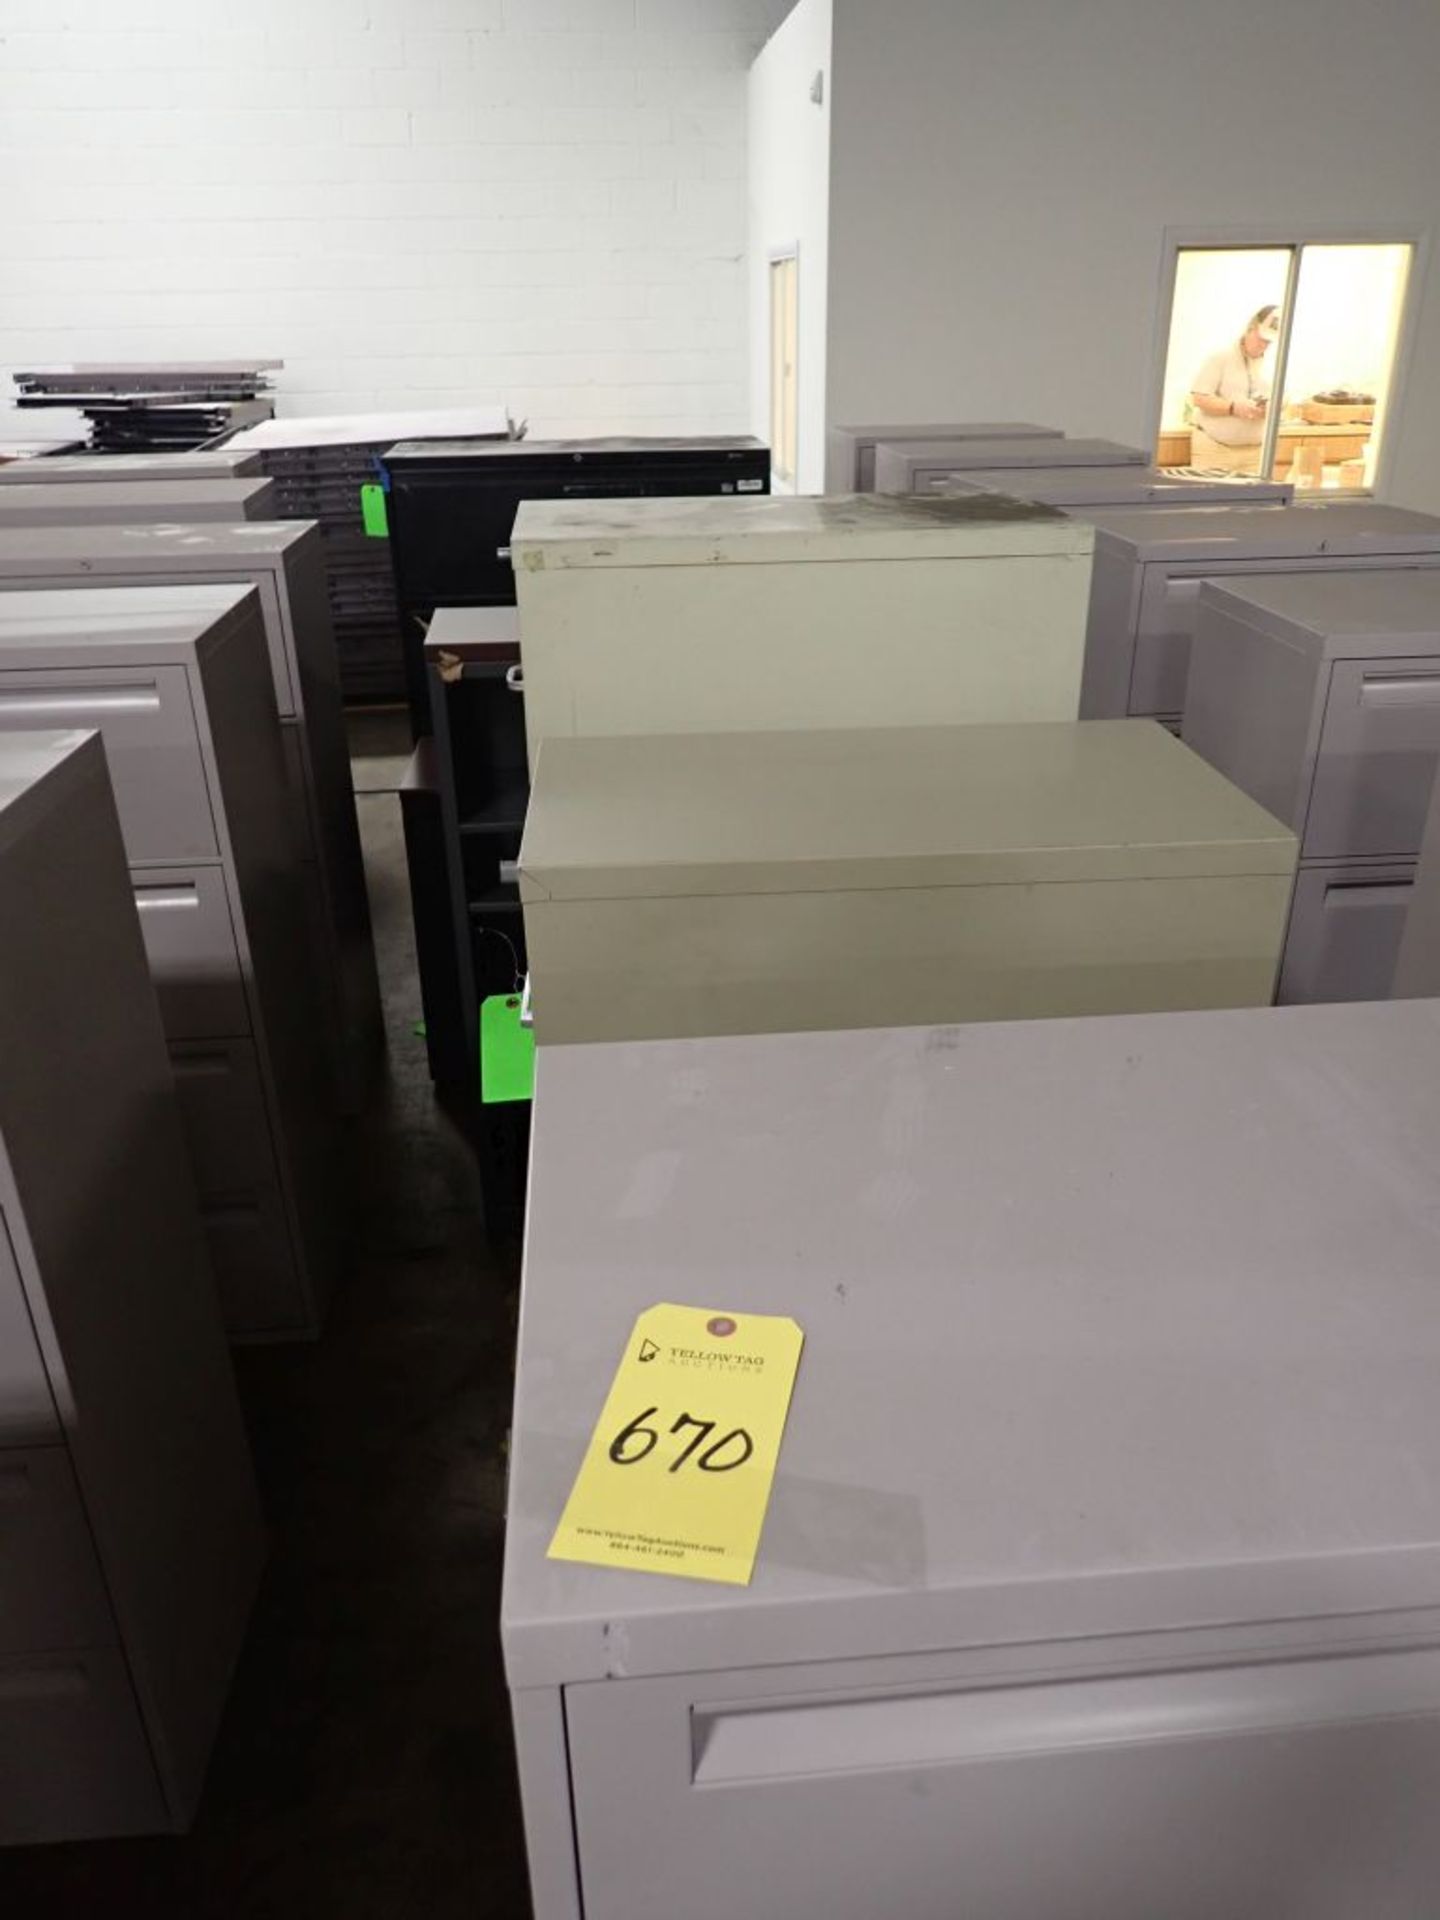 Lot of Cabinets and Shelves | Tag: 241670 | Limited Forklift Assistance Available - $10.00 Lot